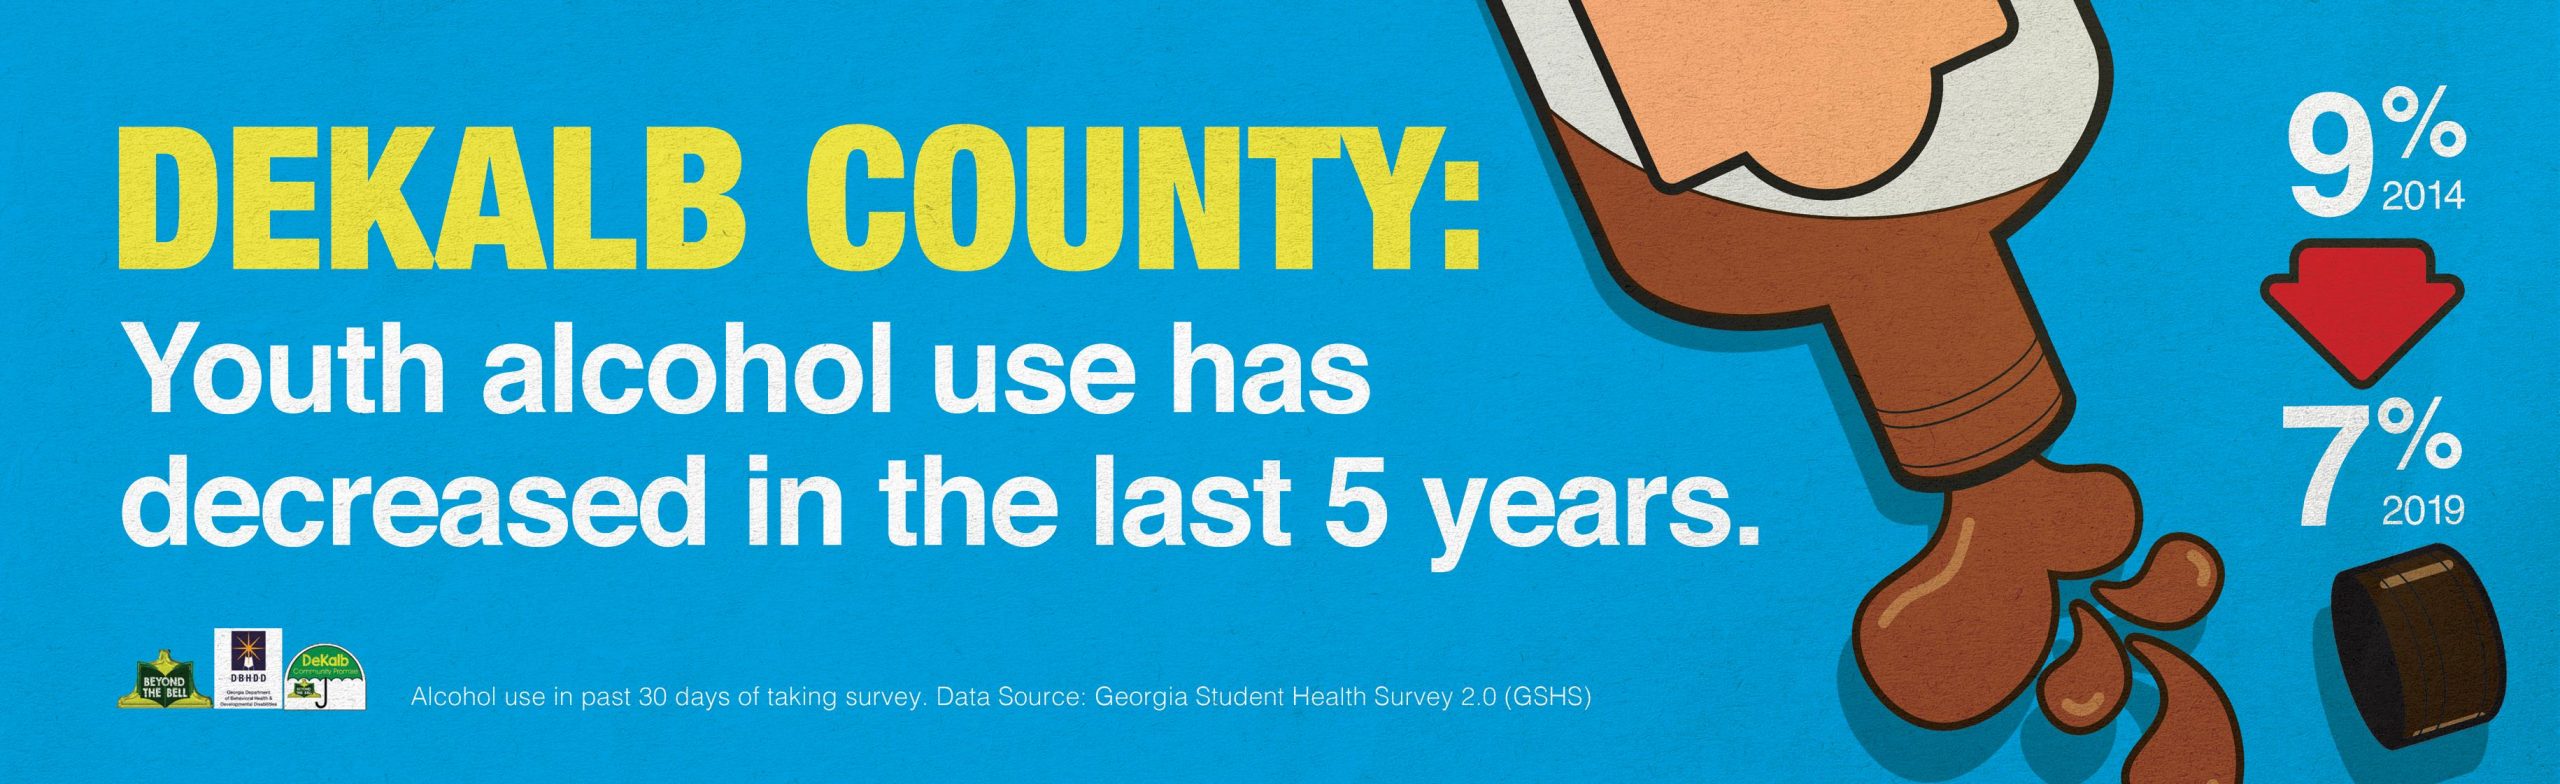 A blue banner with a cartoon liquor bottle spilling brown liquid. In white and yellow text, it says "DeKalb County: Youth alcohol use has decreased in the last 5 years."